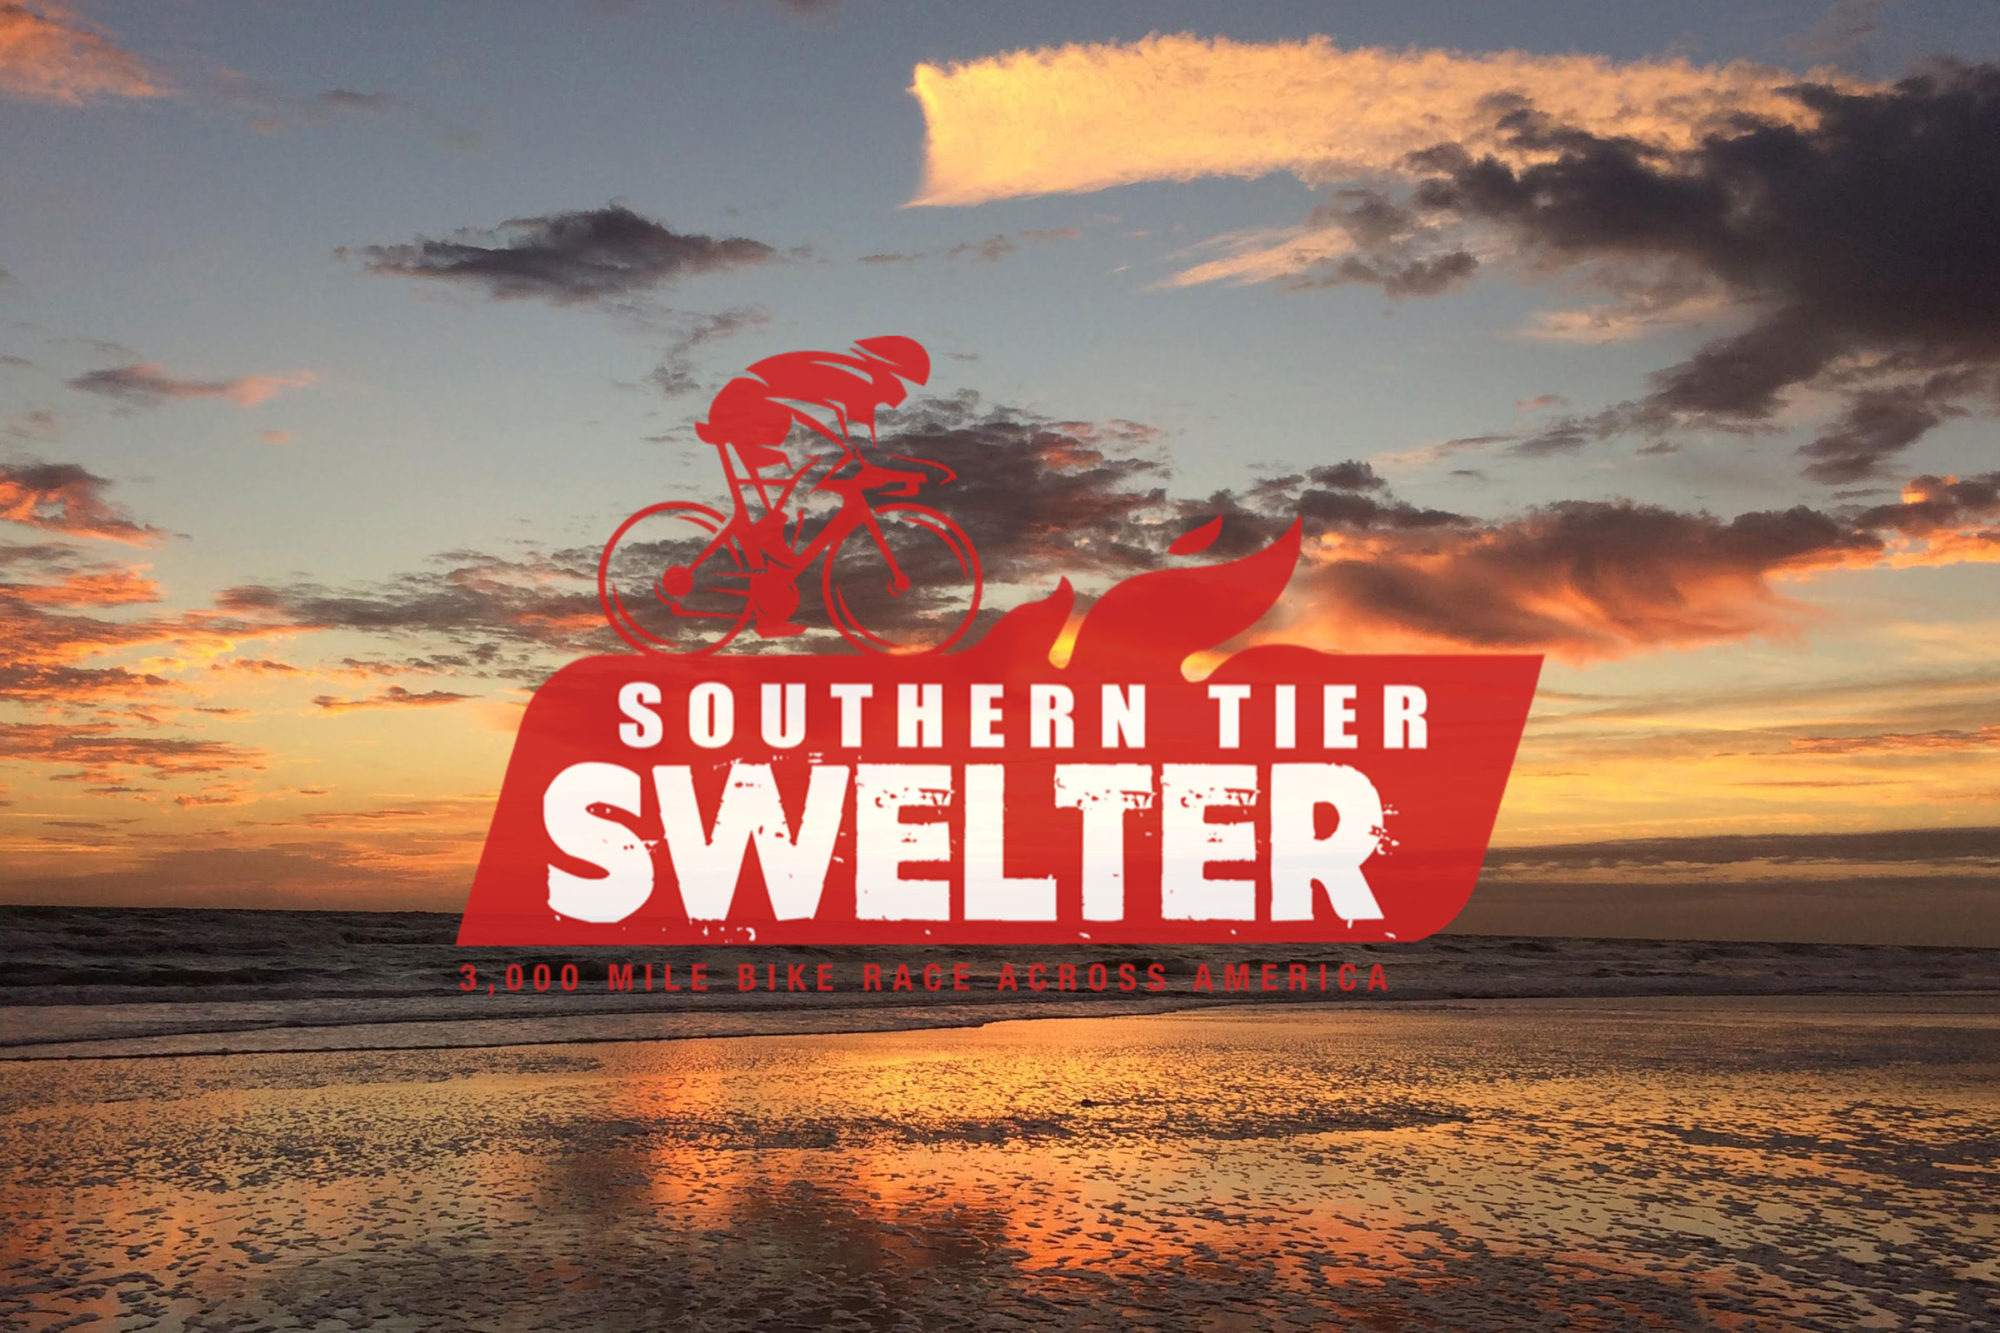 Southern Tier Swelter Race 2020